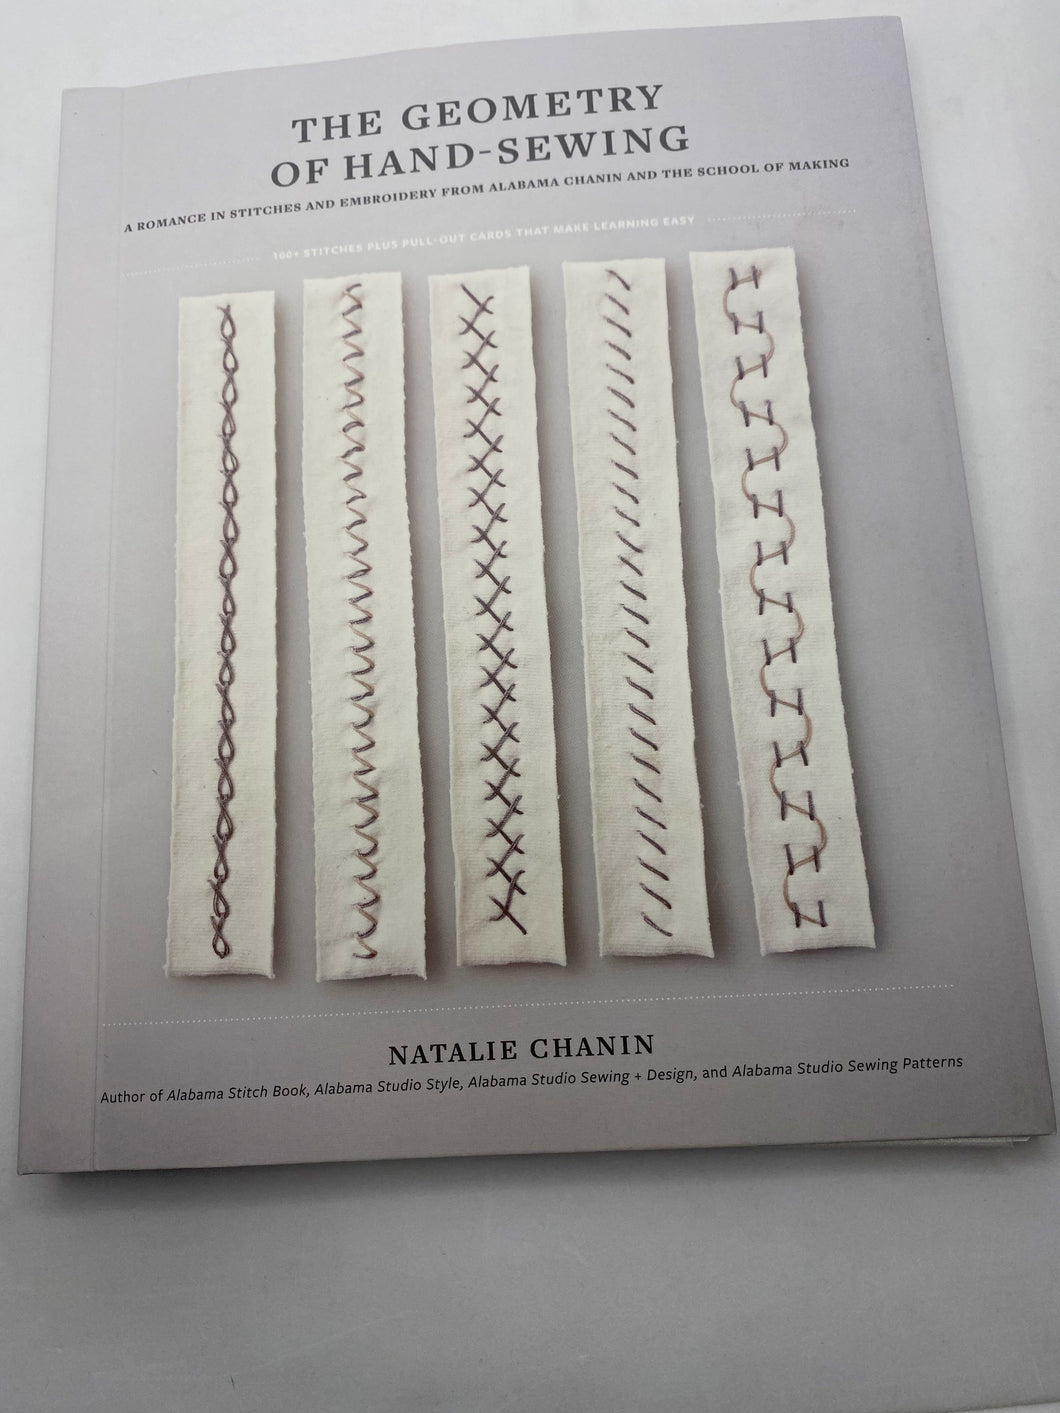 The Geometry of Hand Sewing: A Romance in Stitches and Embroidery by Natalie Chanin